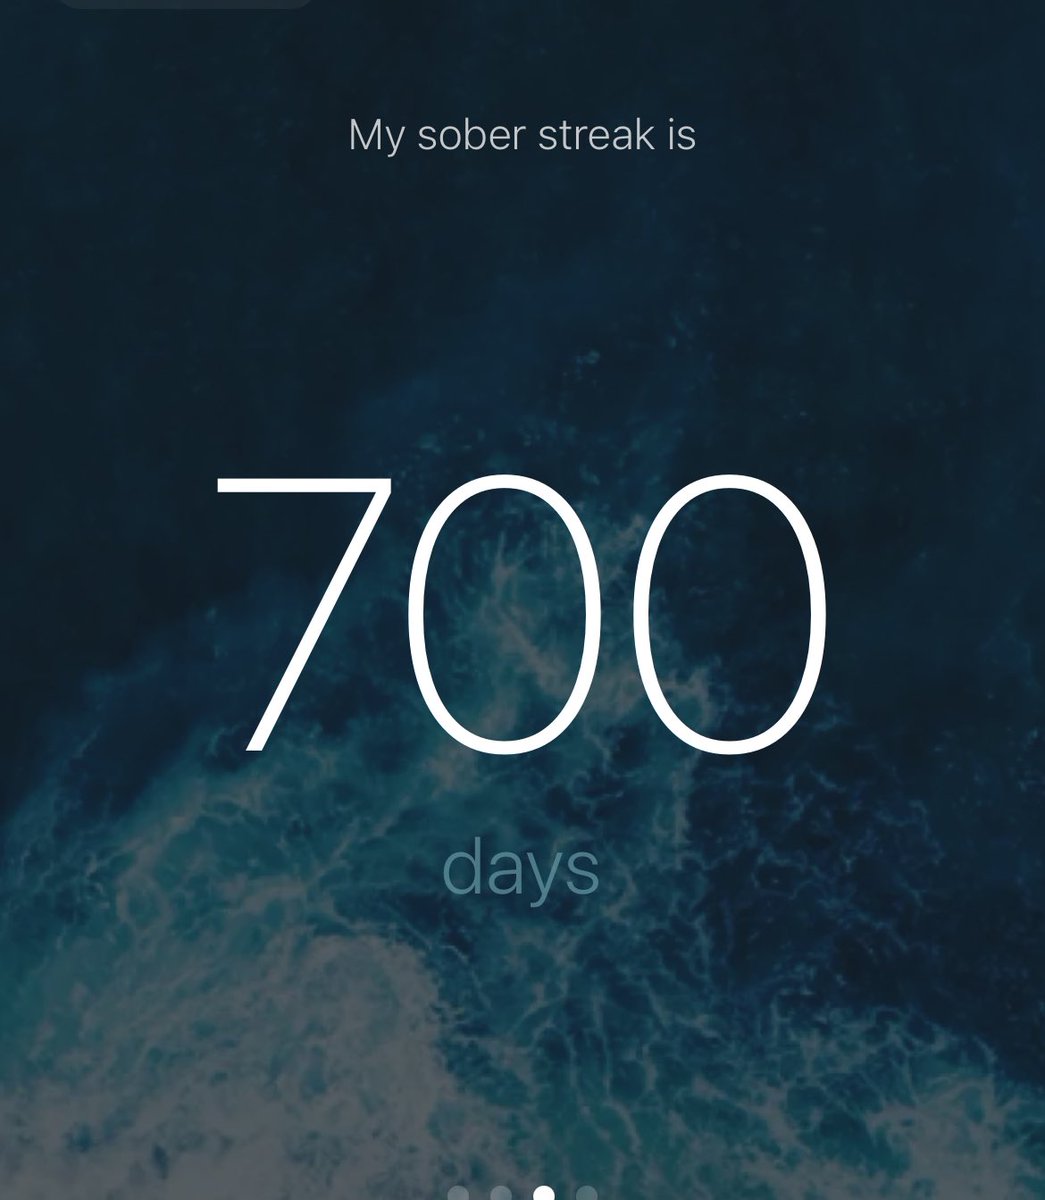 Looks good in either format. One month away from 2 years. #RecoveryPosse #sober #soberlife #odaat